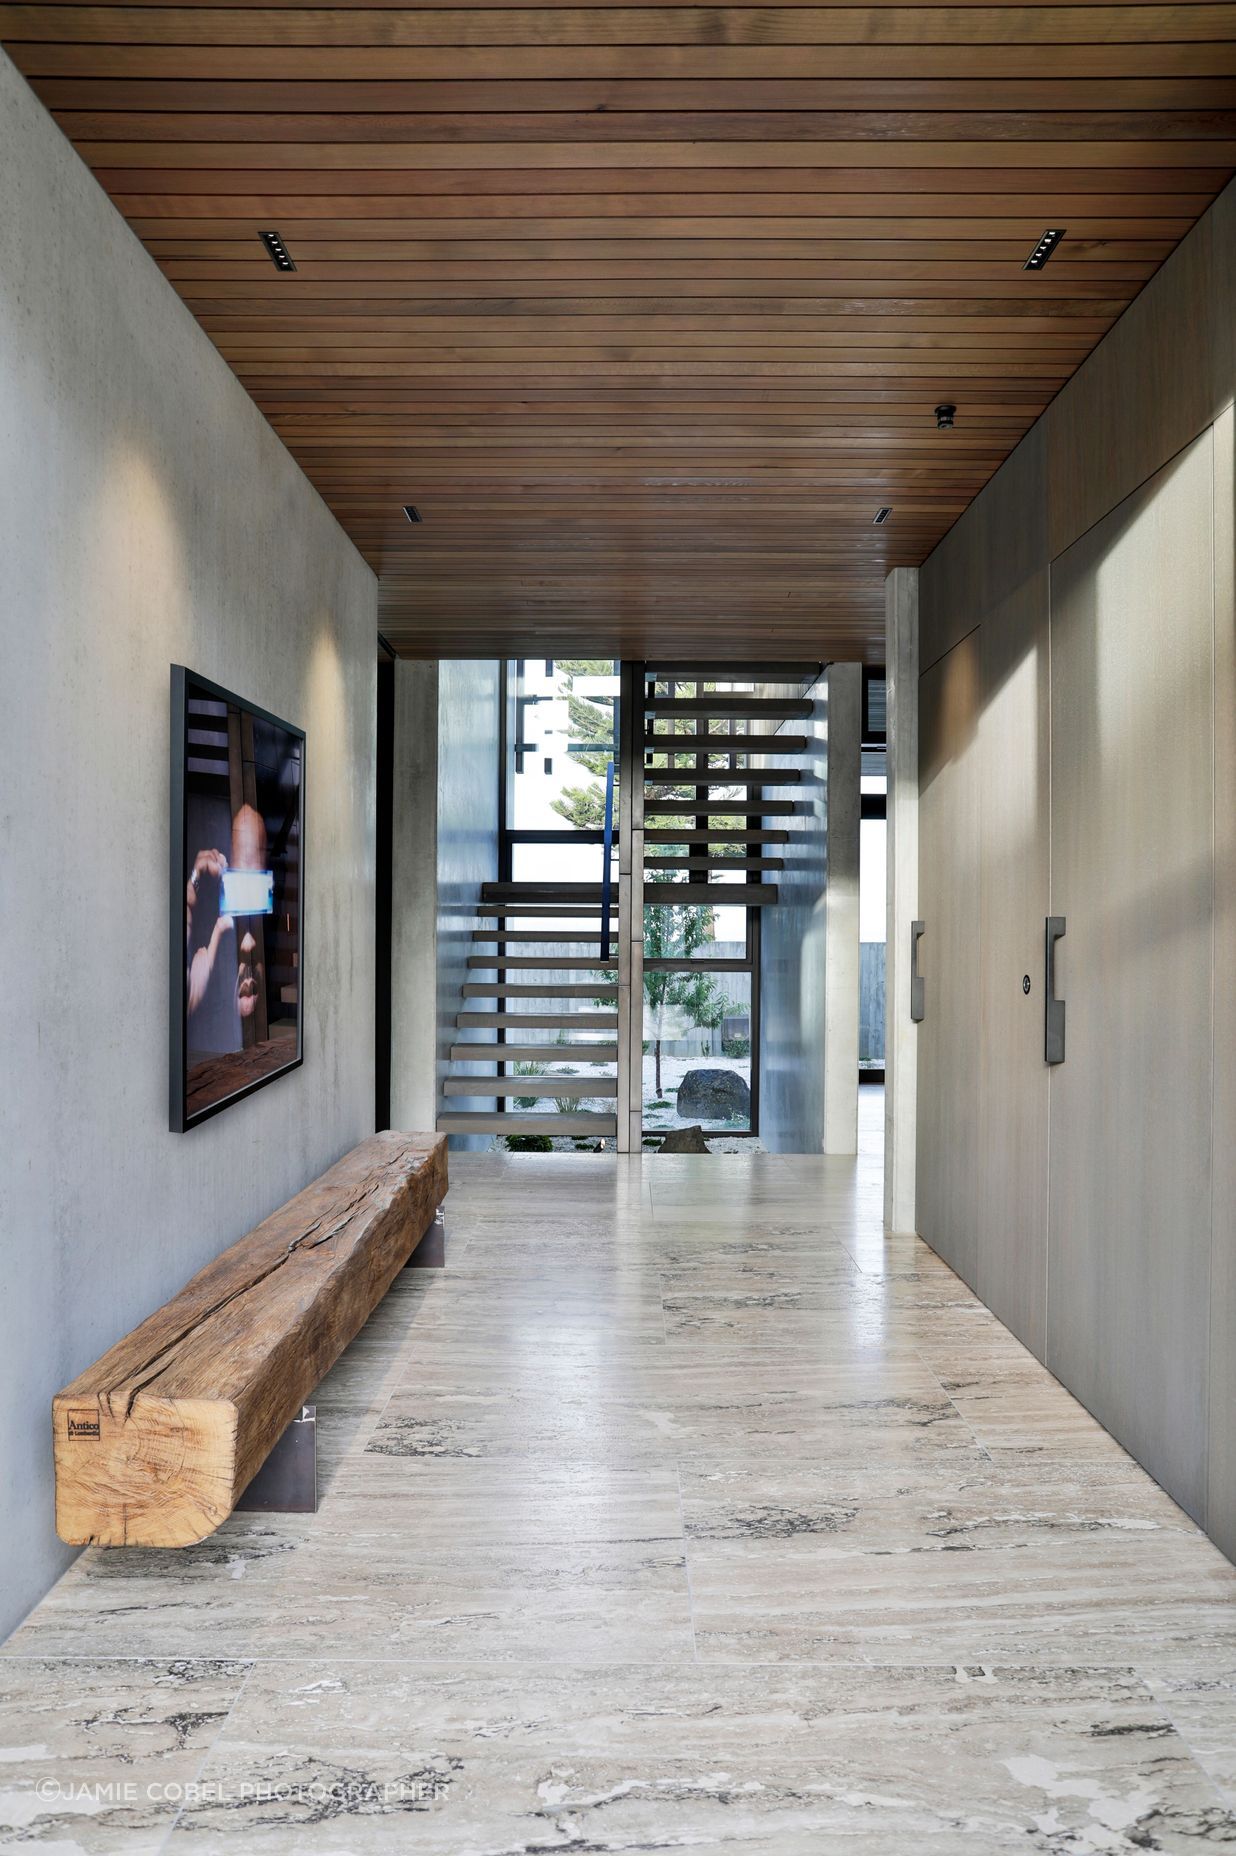 The stair well faces a second hallway that leads to the service and utility spaces.